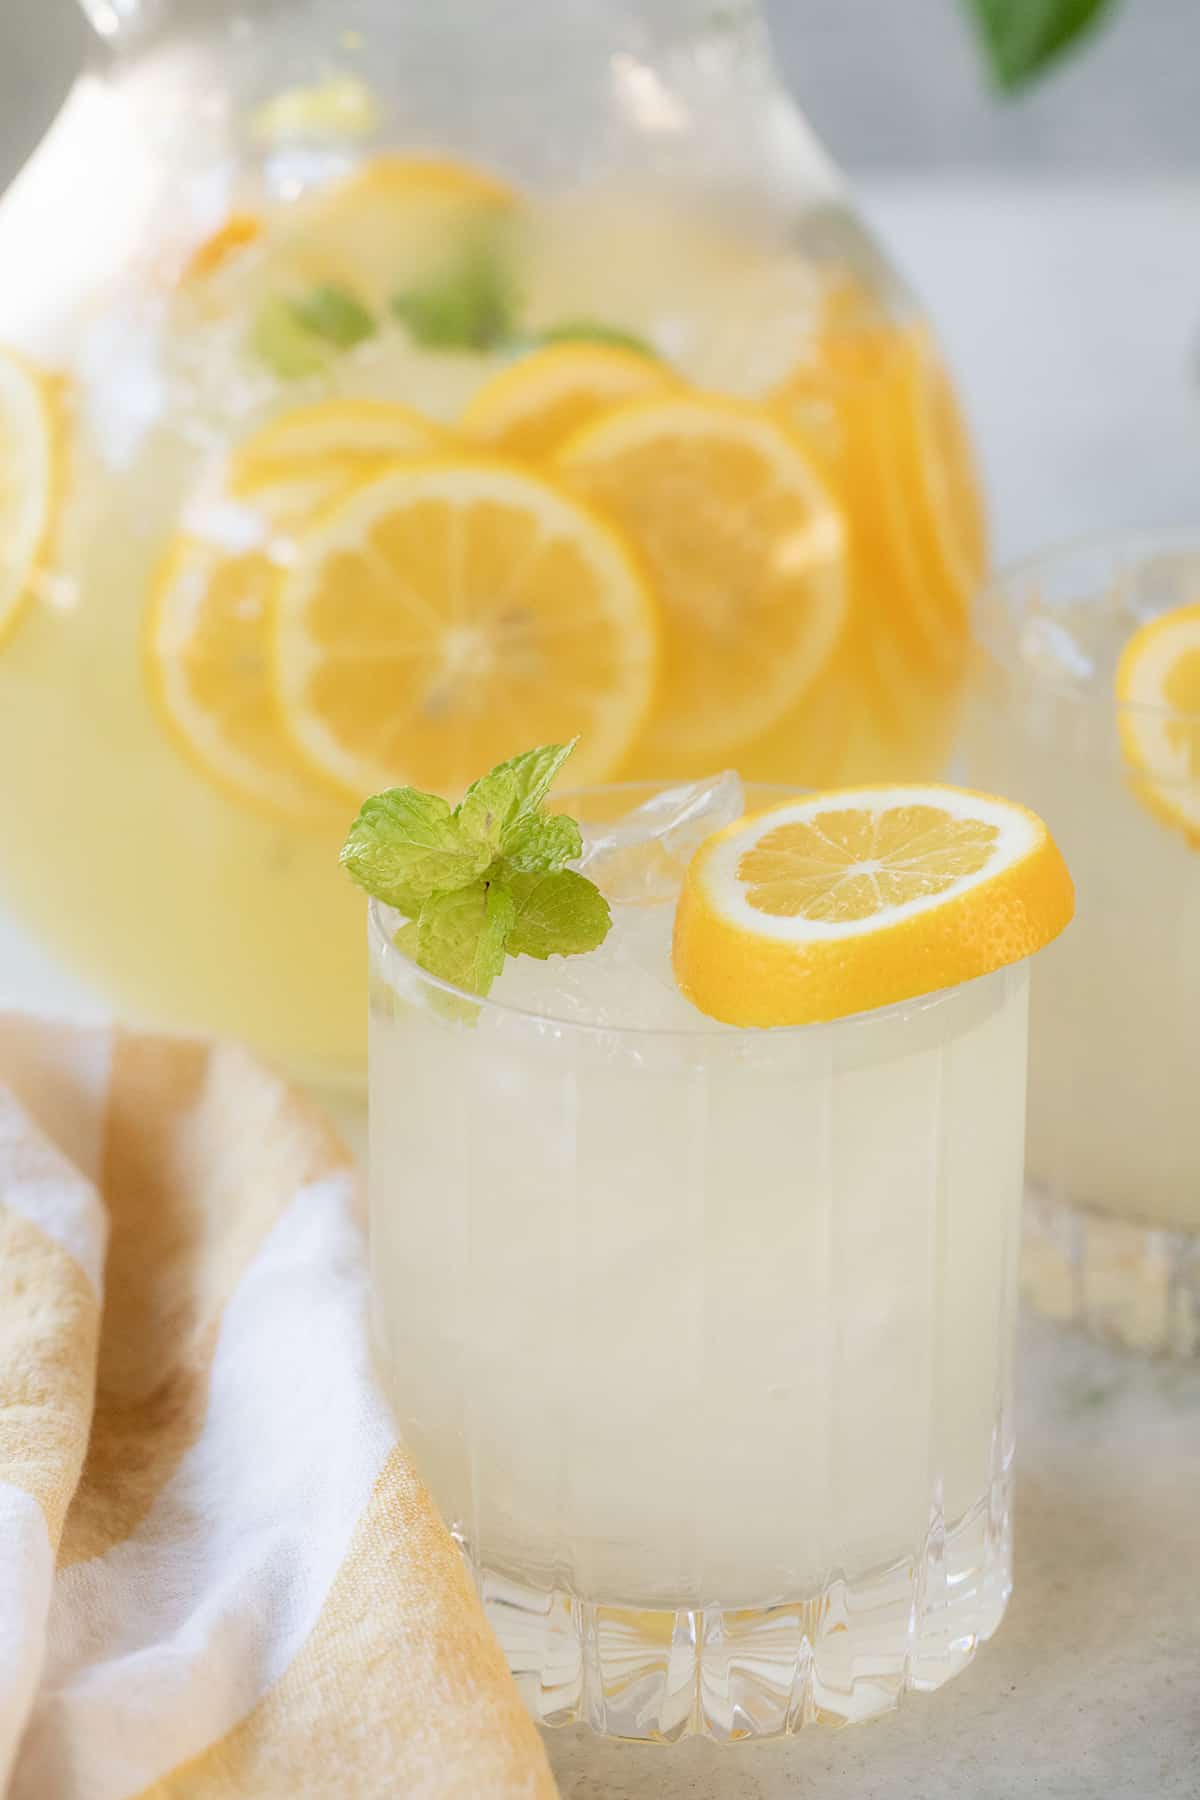 Mint lemonade in a glass with ice, garnished with a lemon slice and mint sprigs.